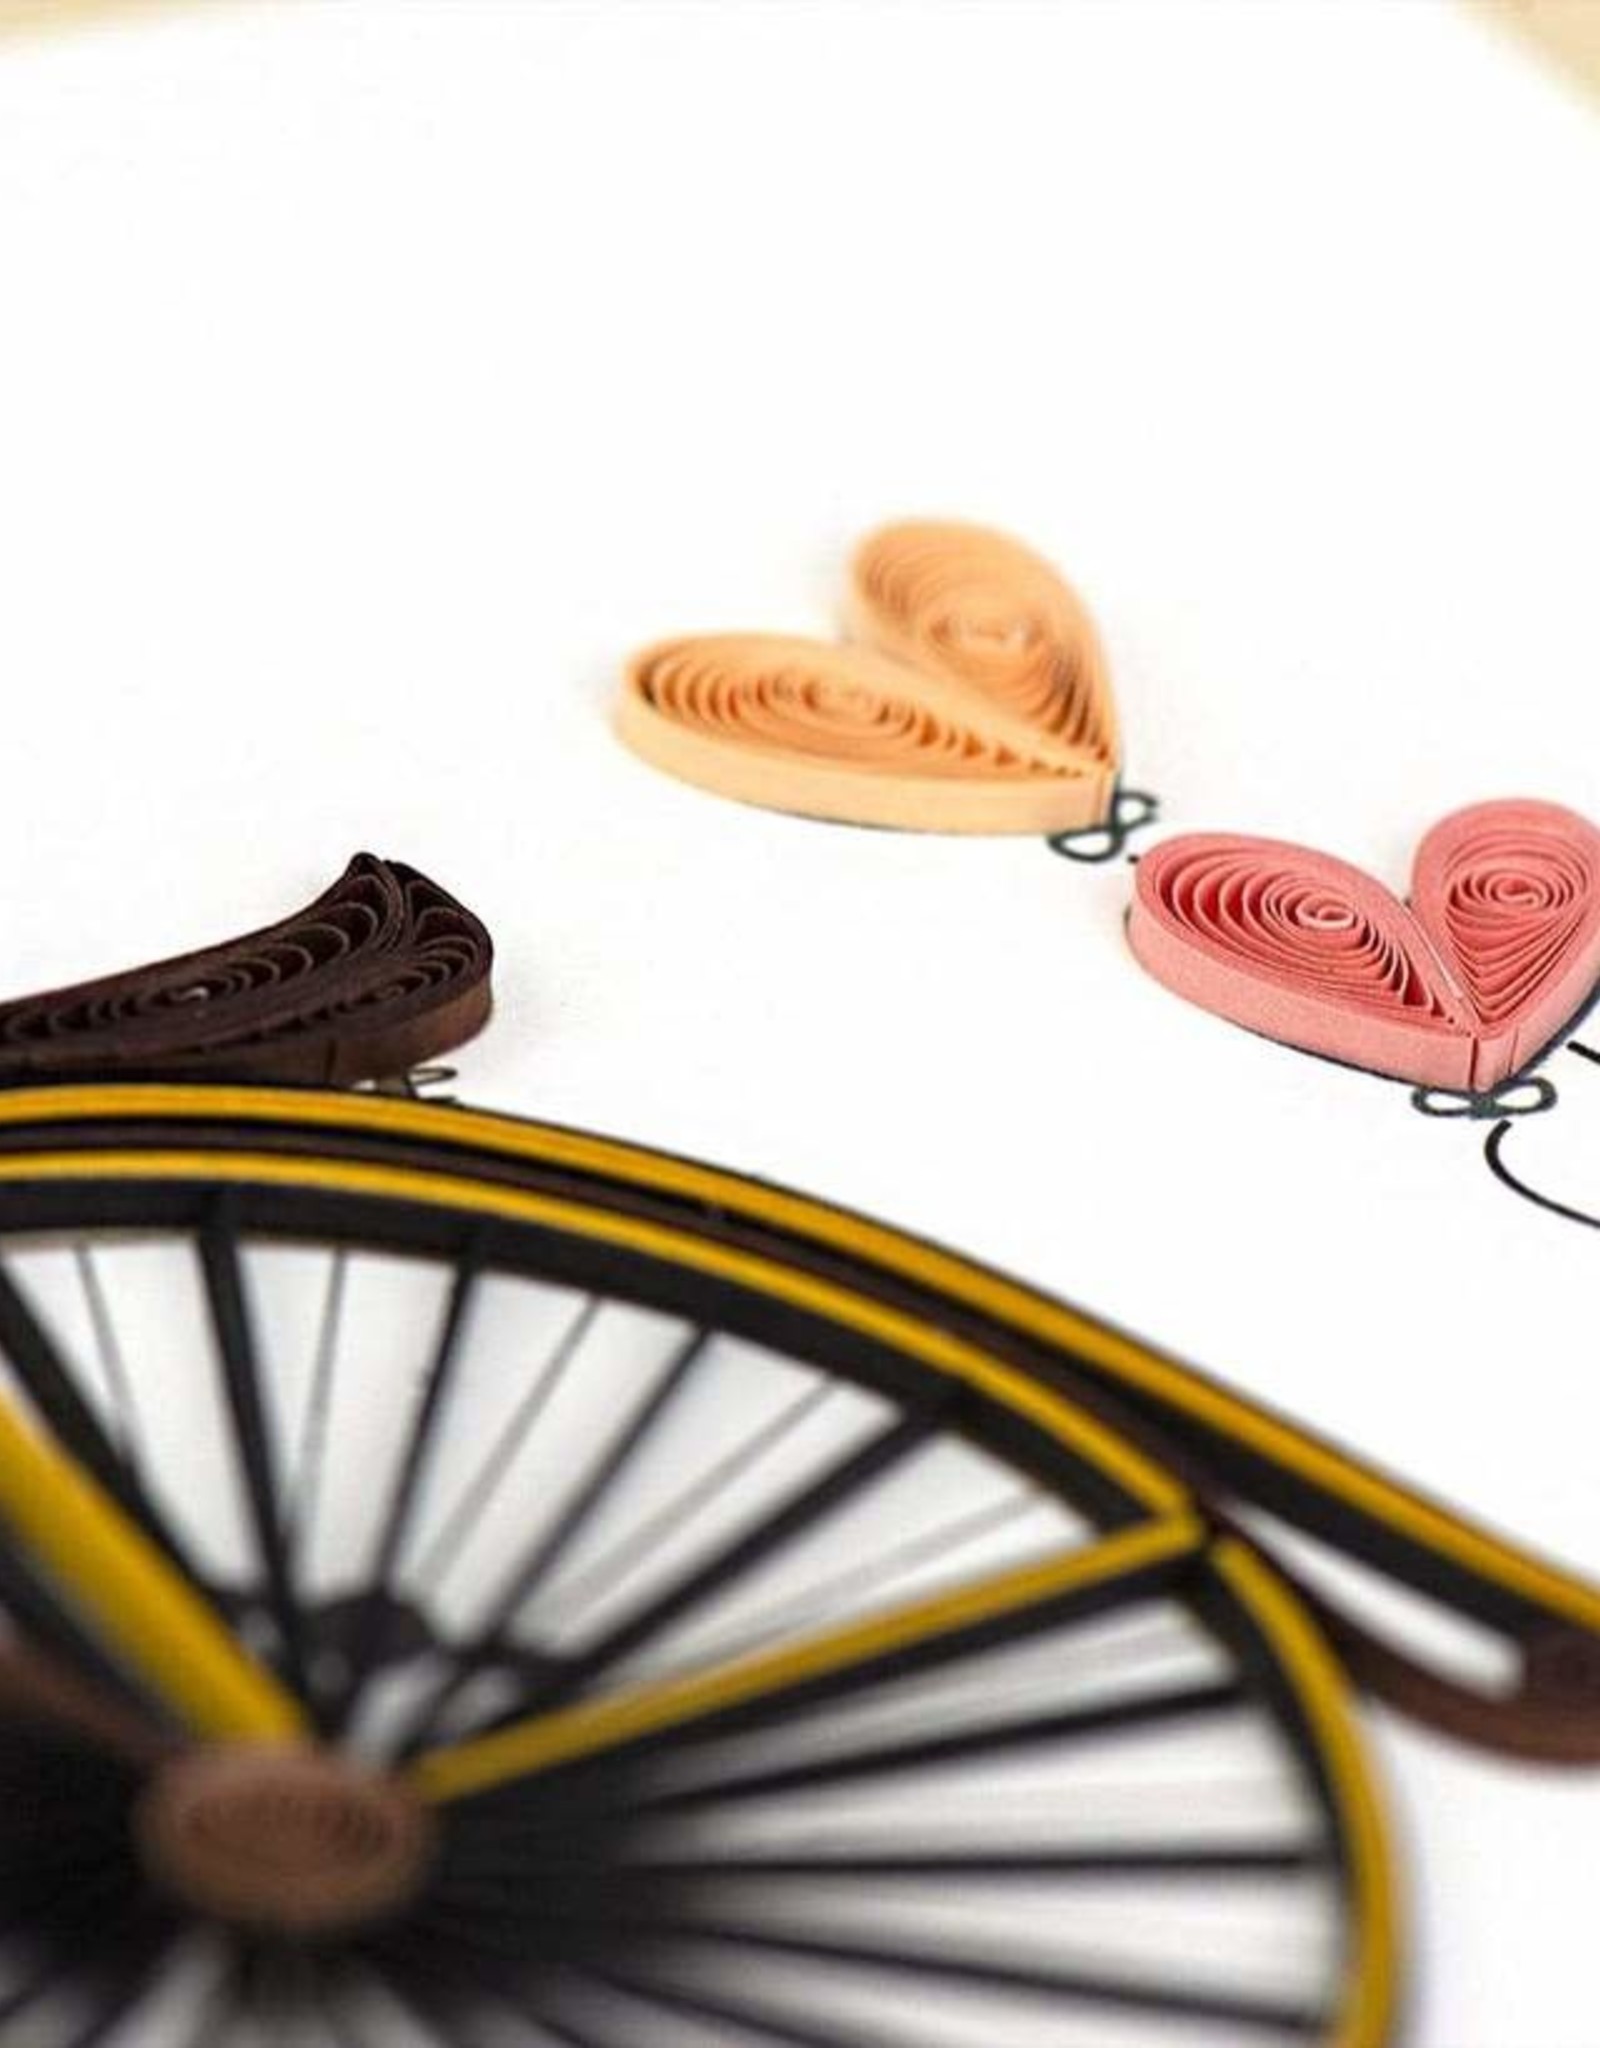 Quilling Card Quilled Vintage Bicycle Card